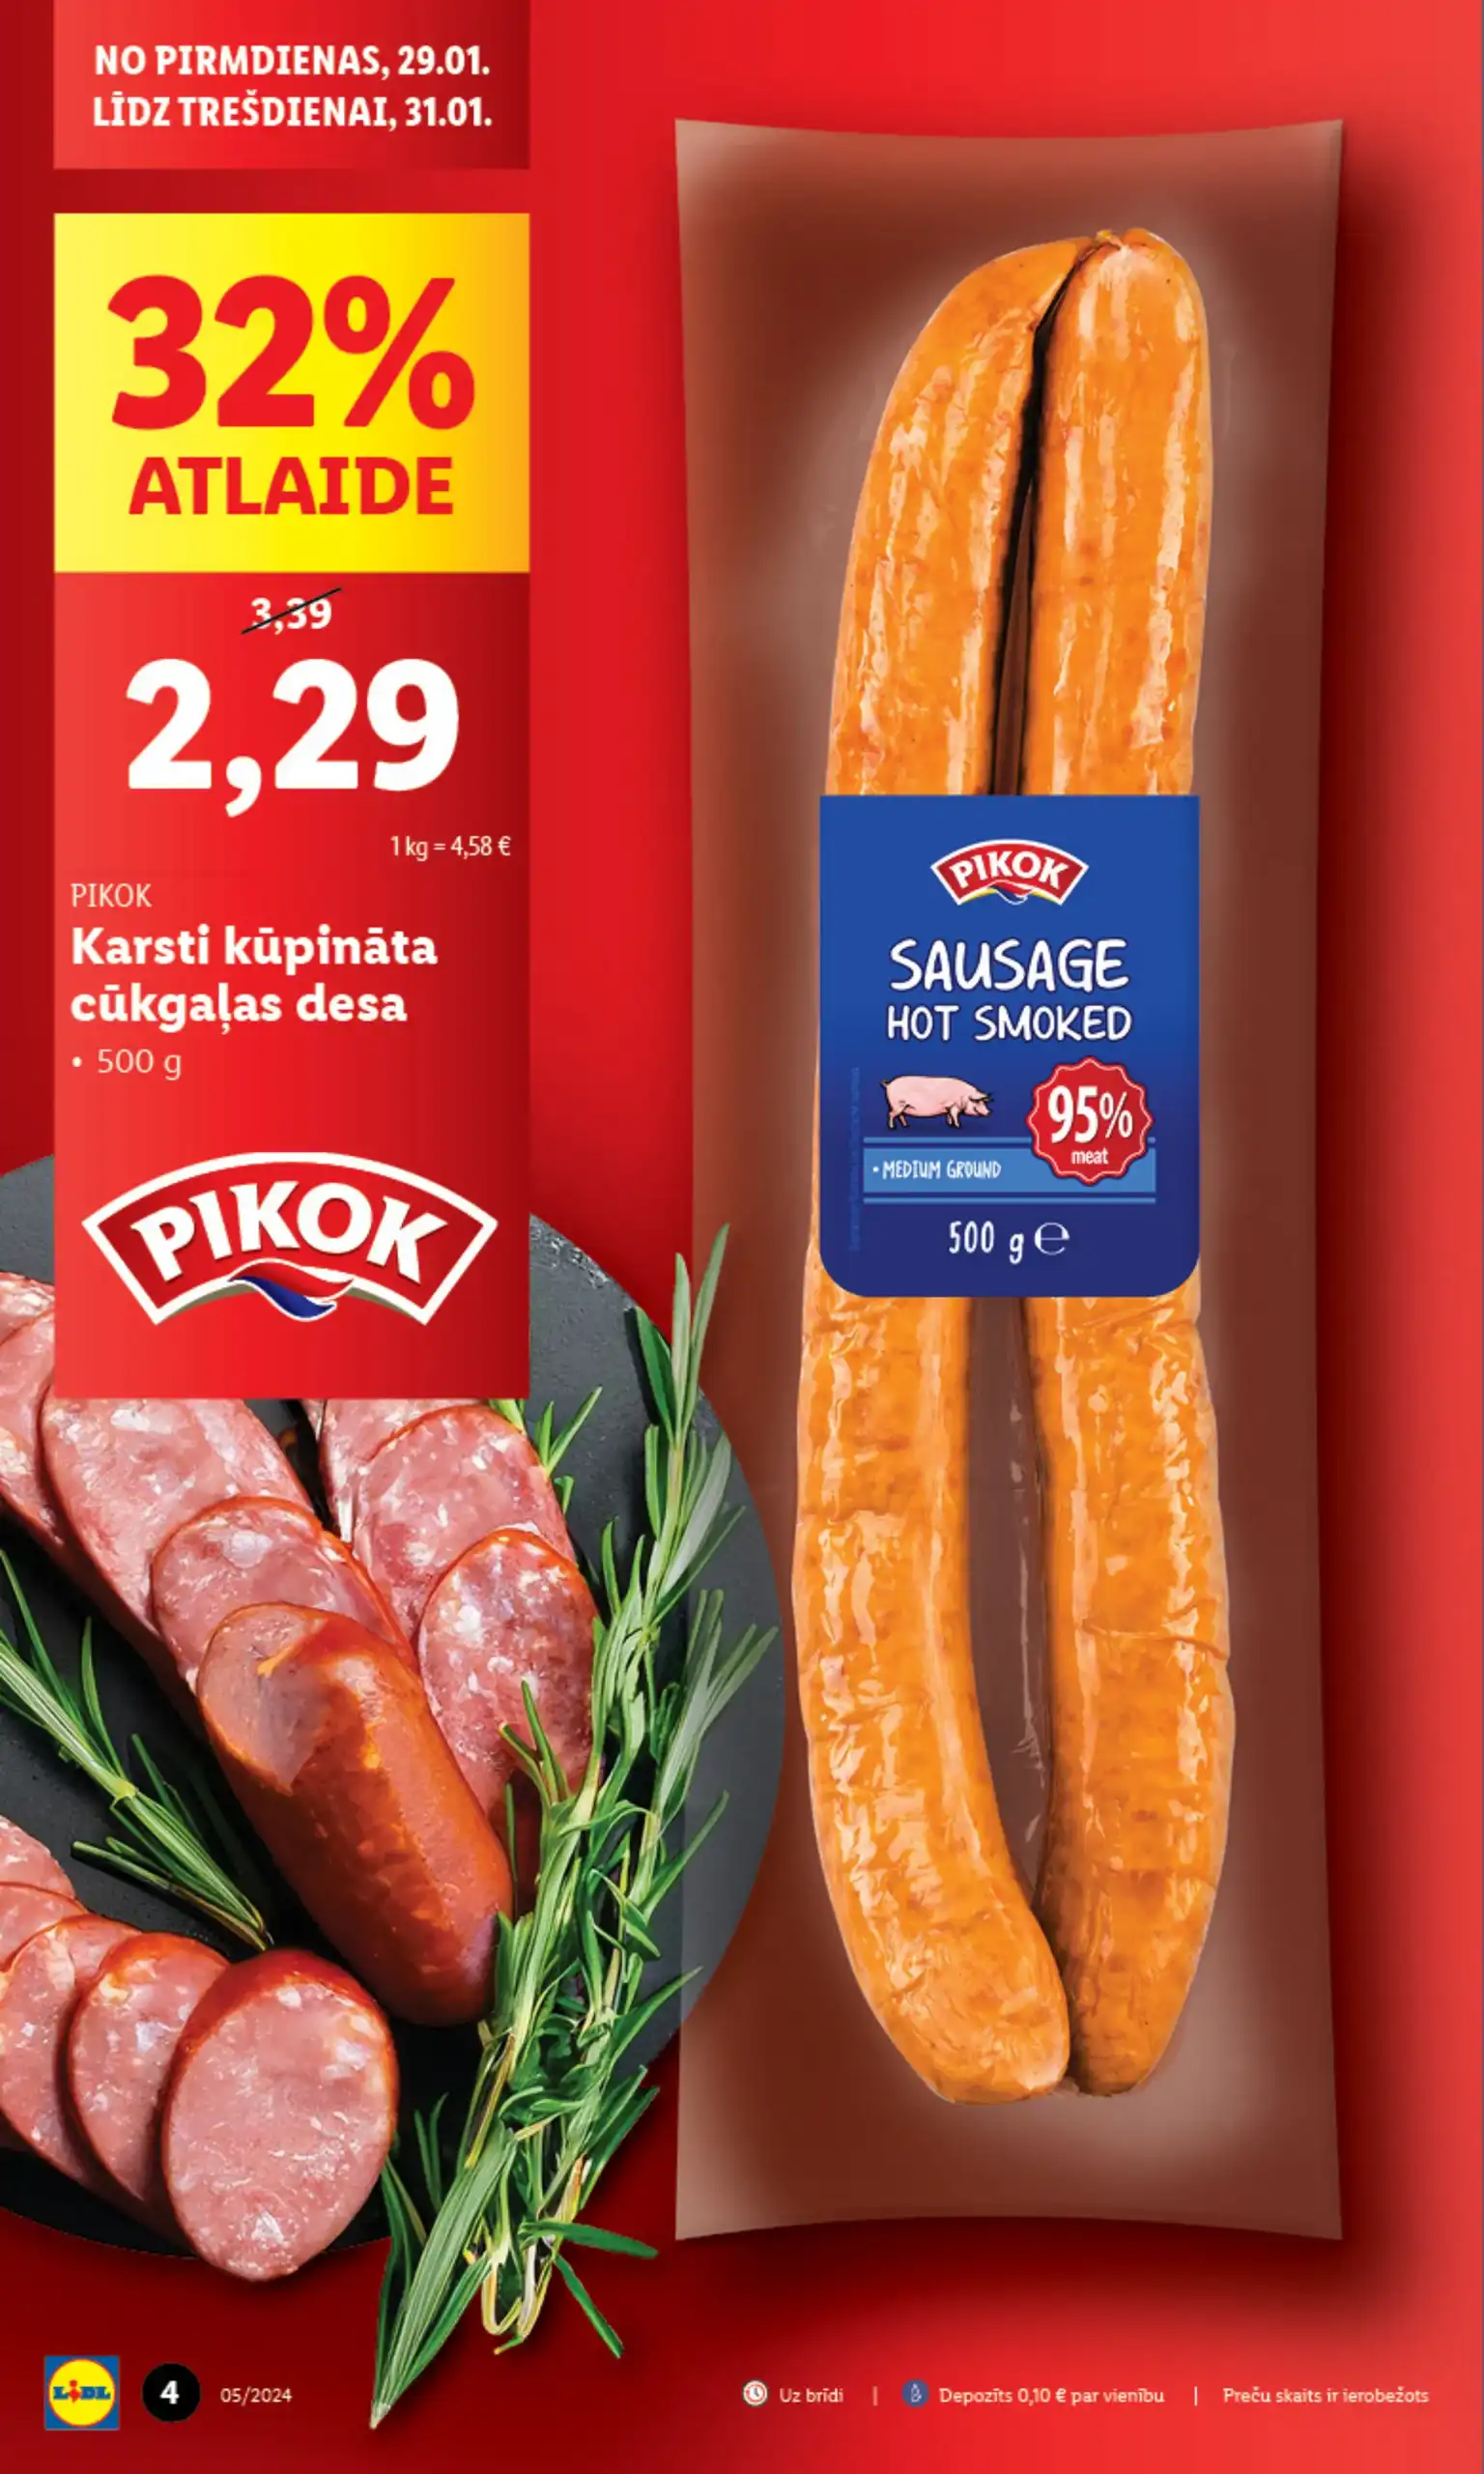 LIDL 29-01-2024-04-02-2024 Page 4